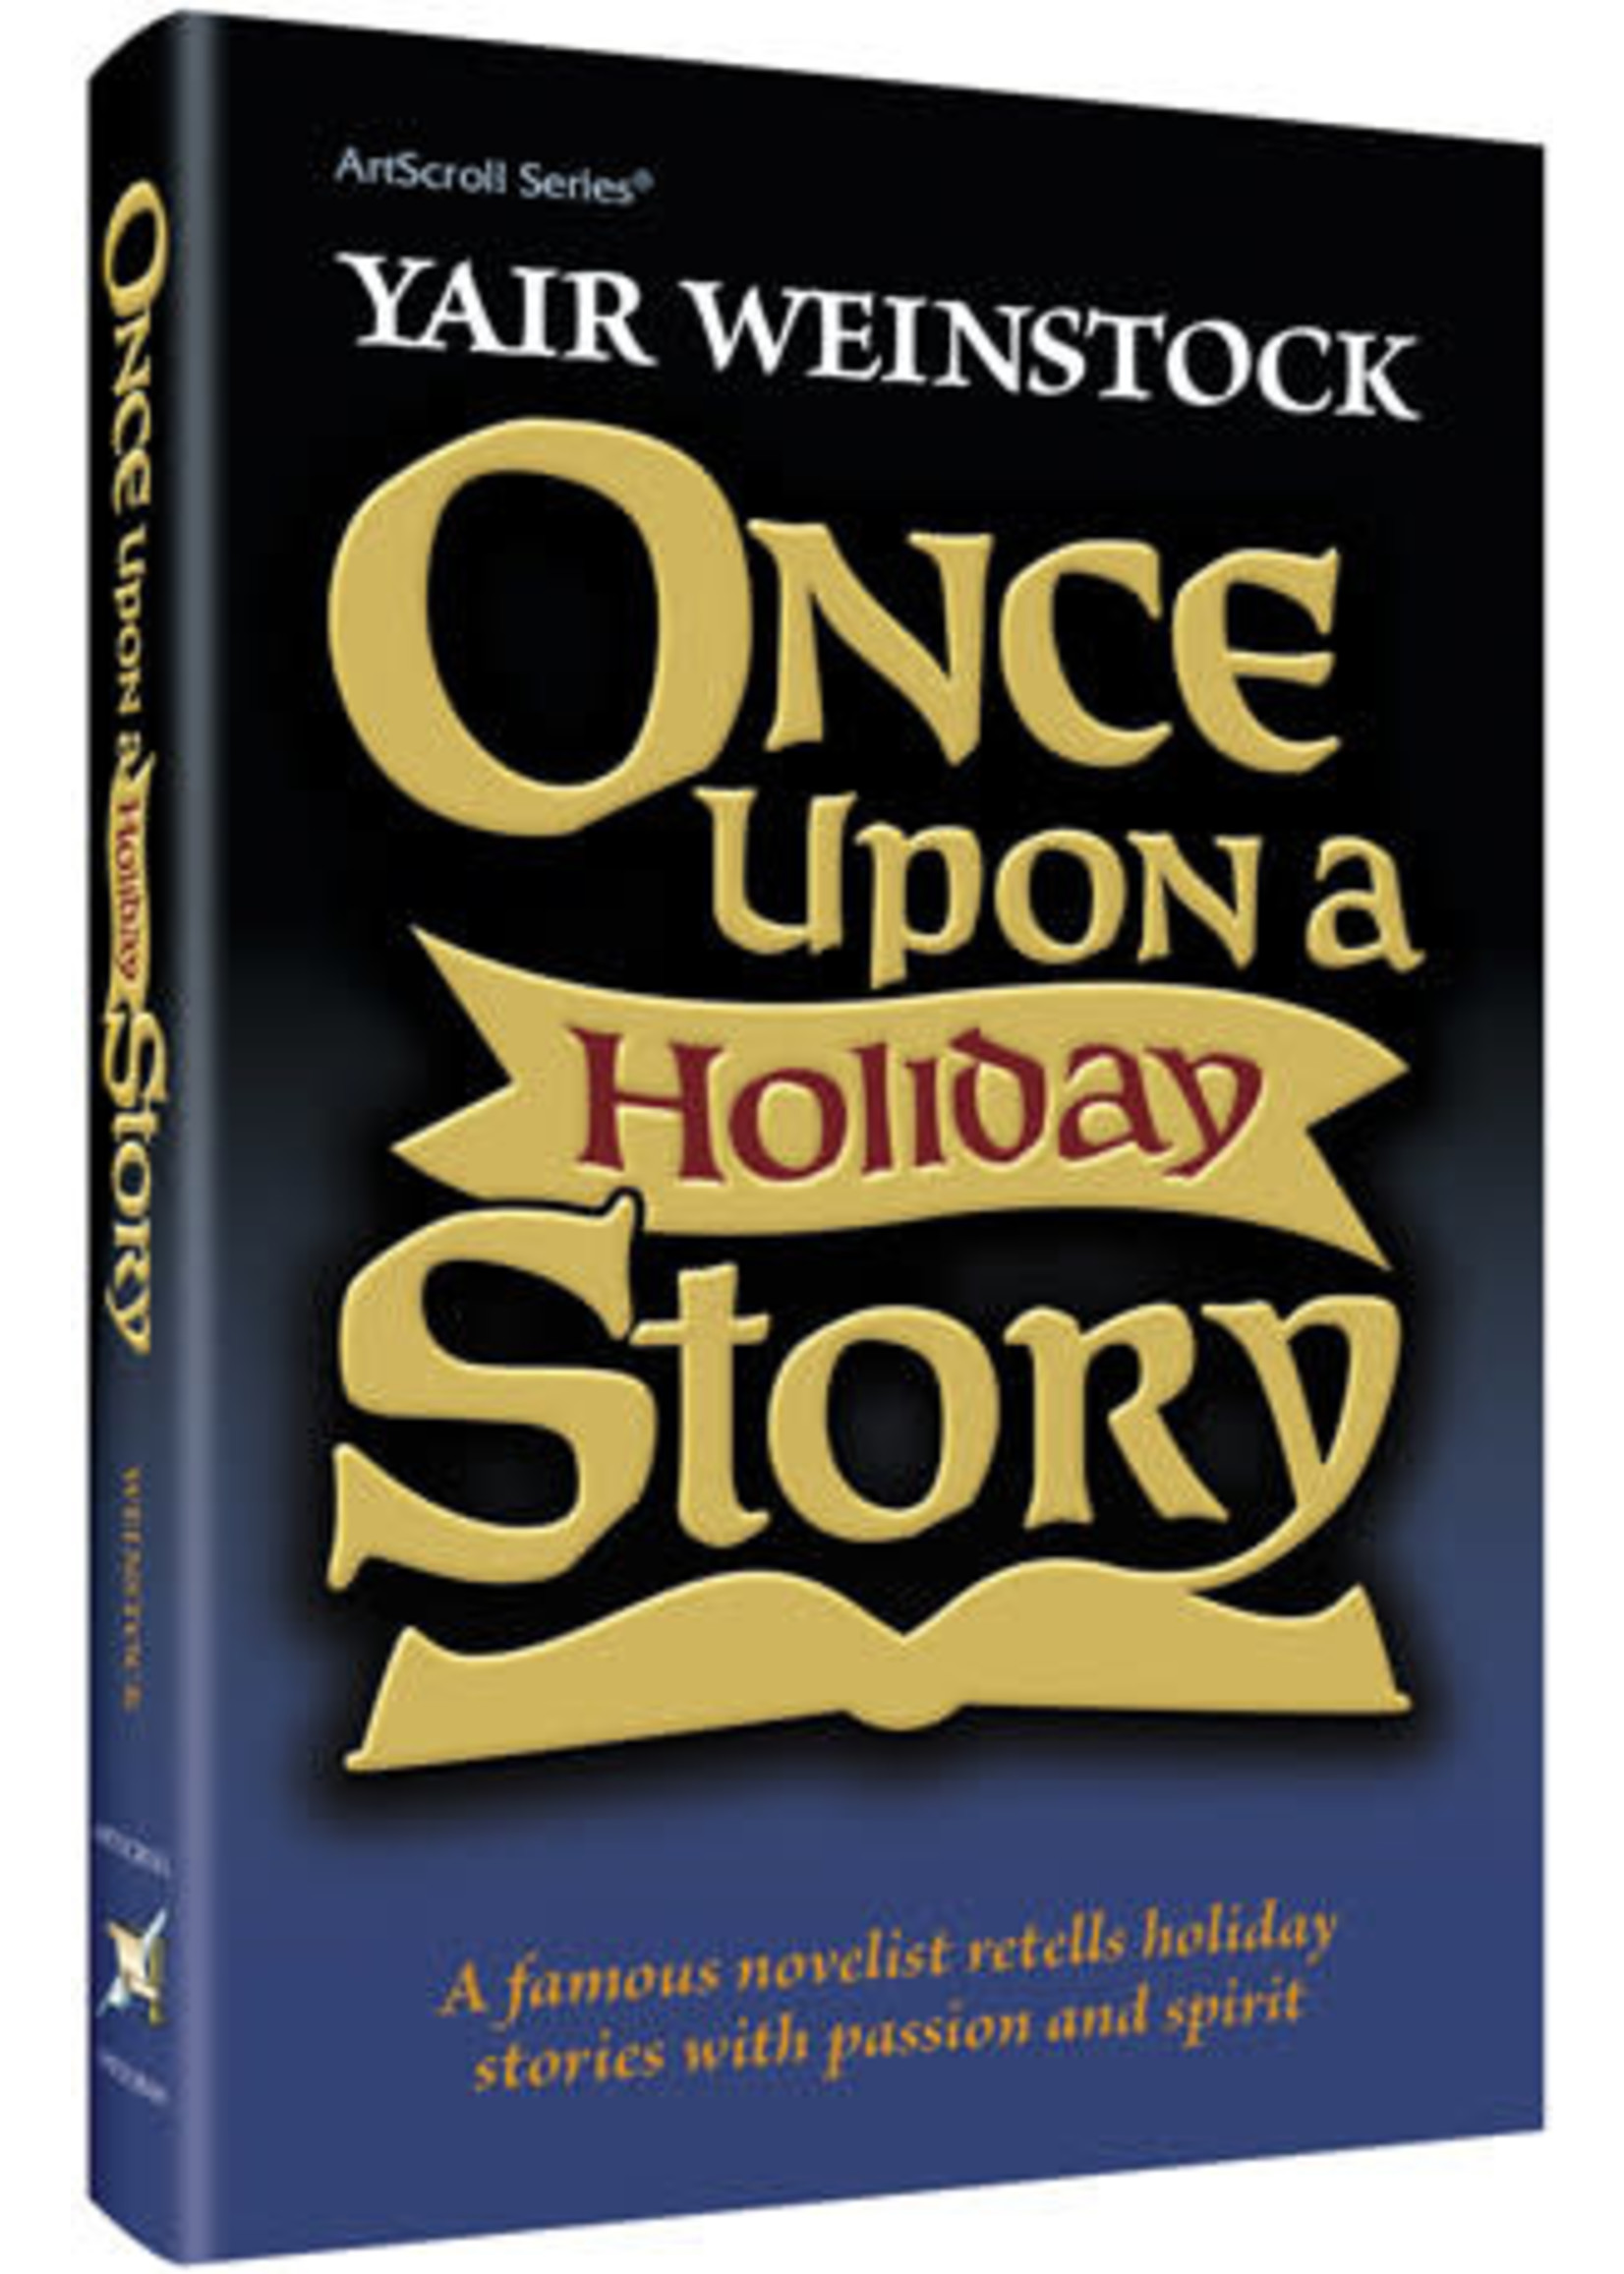 ONCE UPON A HOLIDAY STORY  H/C